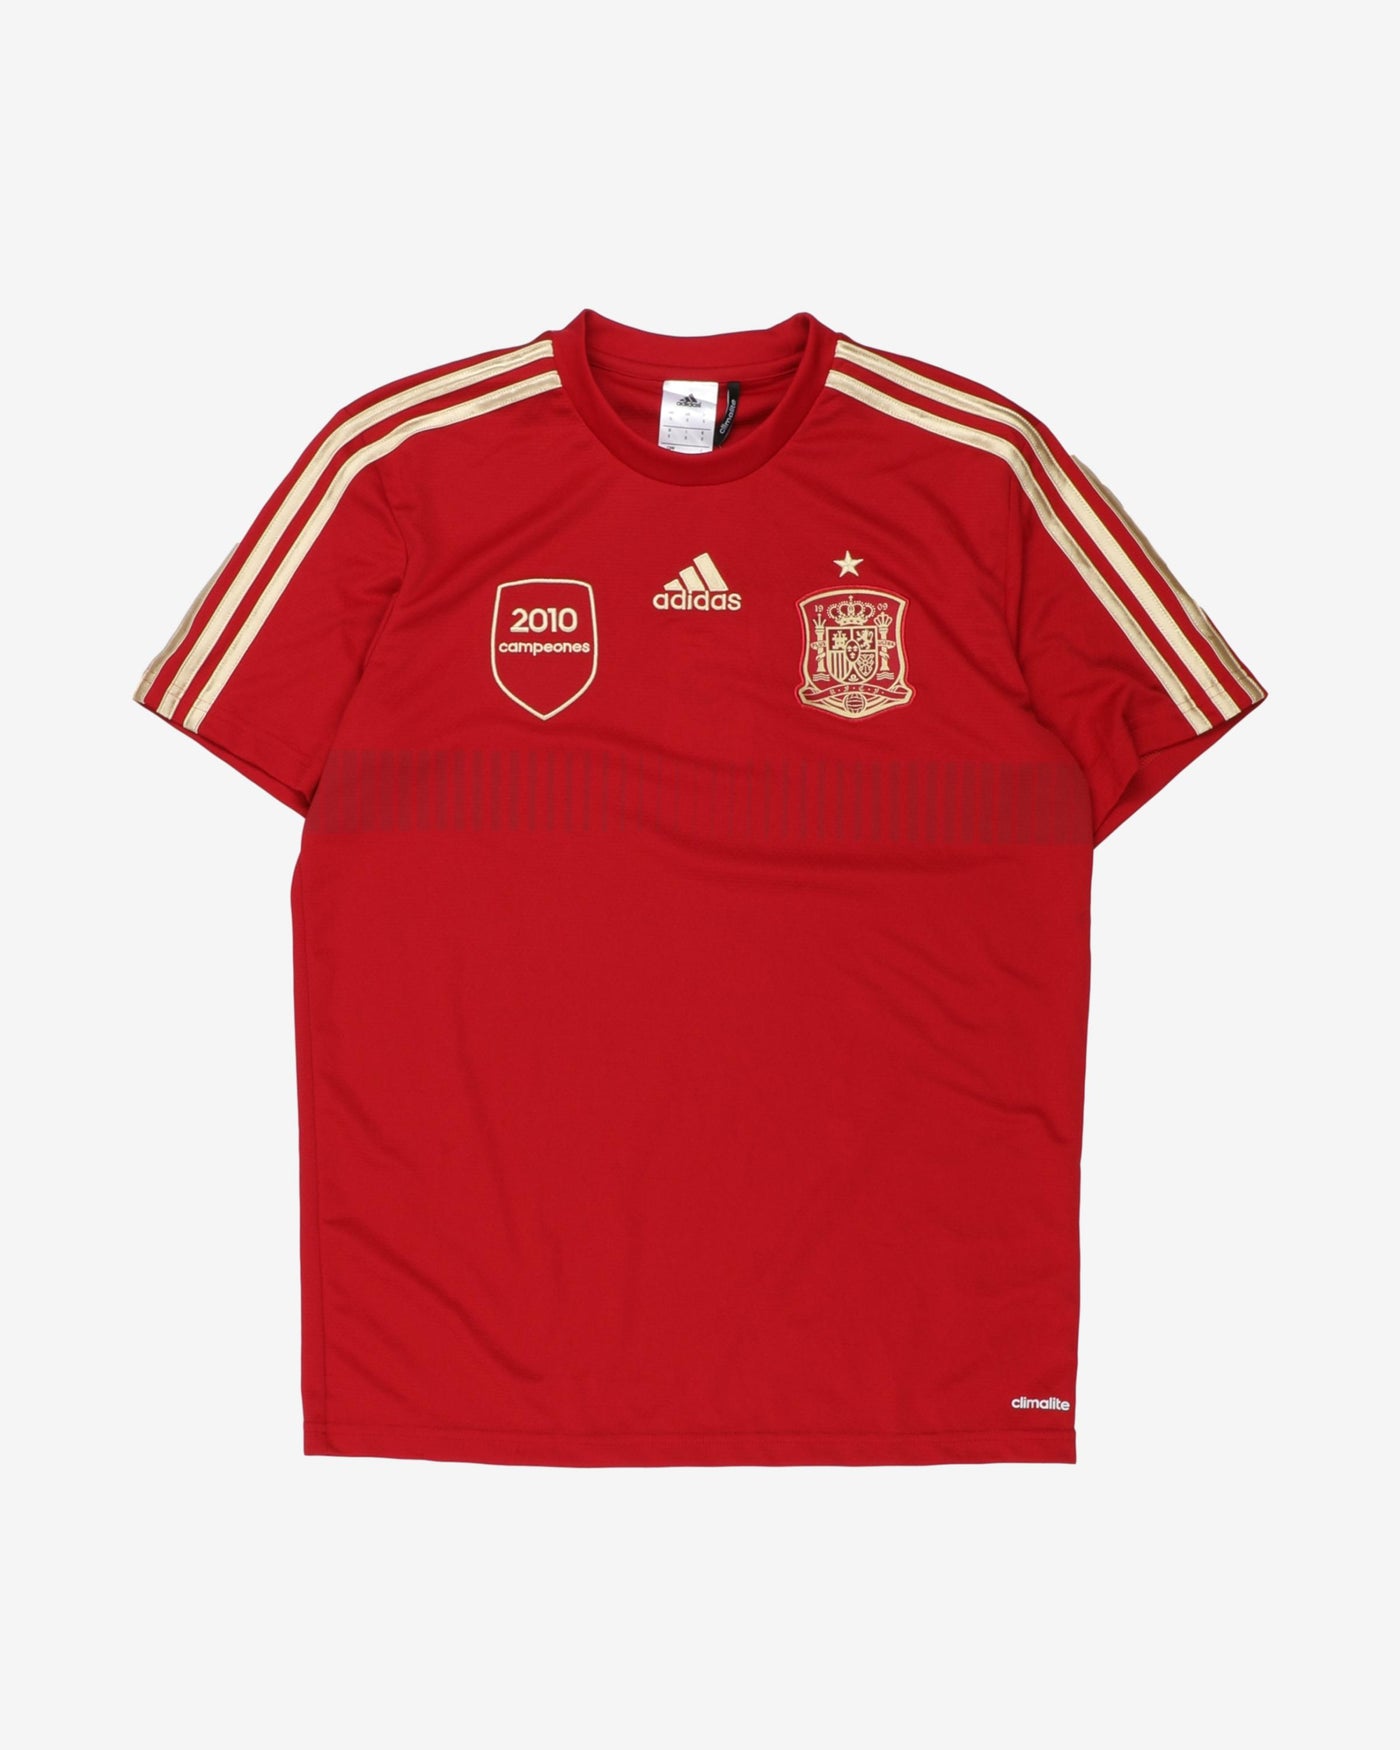 Spain 2010 World Cup Champions Adidas Home Kit - S